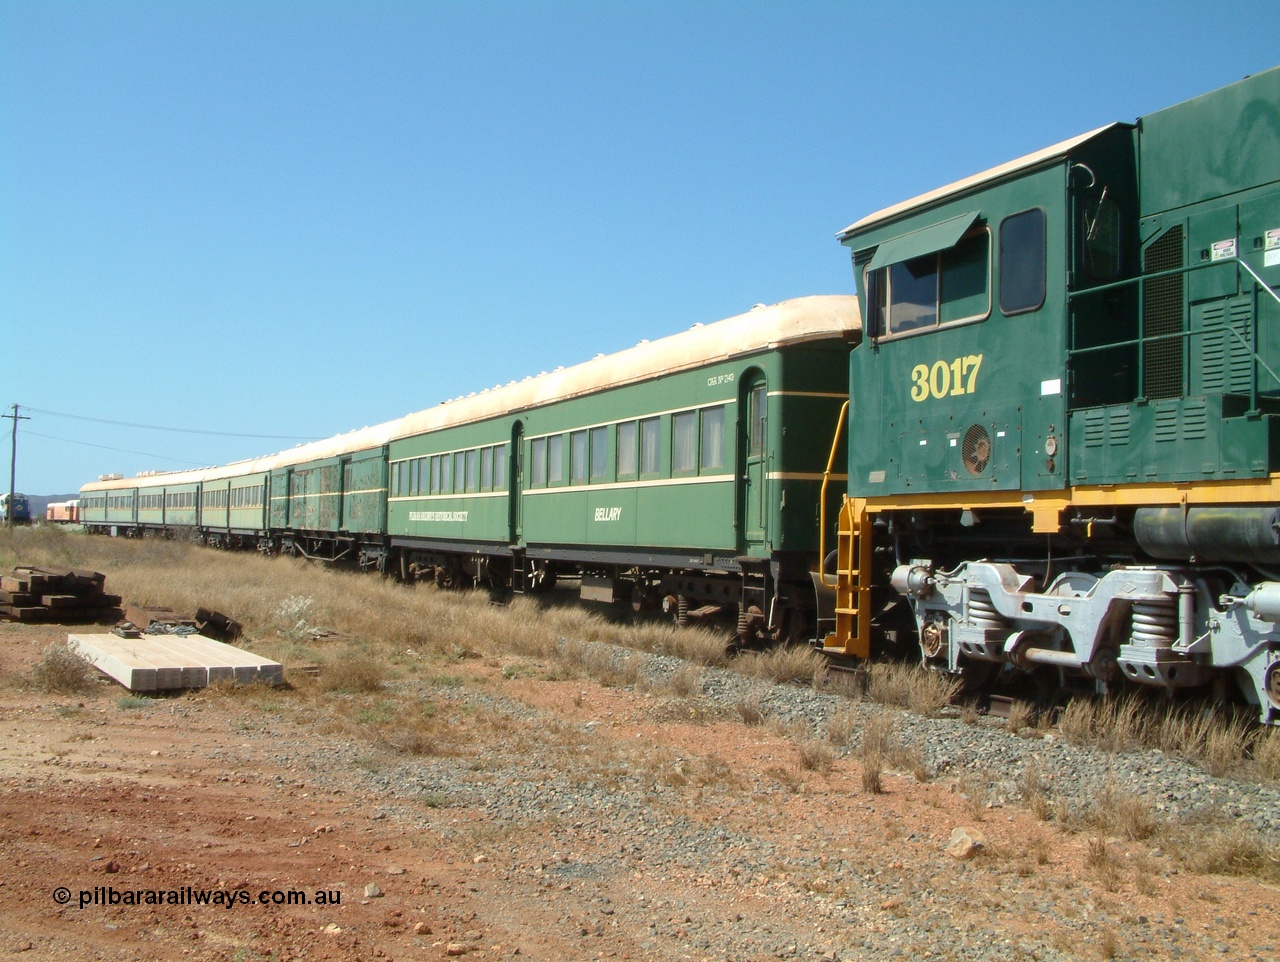 041014 142318
Pilbara Railways Historical Society, view along the passenger carriages behind rebuilt ALCo C636R locomotive 3017 with the first passenger carriage 'Bellary' was originally built by Clyde Engineering at Granville NSW in 1936 for the NSWGR as a second class railway carriage FS type FS 2143. In 1987 it was purchased by the Society and is named after a local river. The next carriage is van 'Portland' and originally an NSWGR MHO type guards van MHO 2321, then recoded to KB type mail van, then to KBY 2513 guards van. For a view 20 years later [url=https://pilbararailways.com.au/gallery/displayimage.php?pid=17751]click here[/url]. 14th October 2004.
Keywords: 3017;Comeng-WA;ALCo;C636R;WA-135-C-6043-04;rebuild;